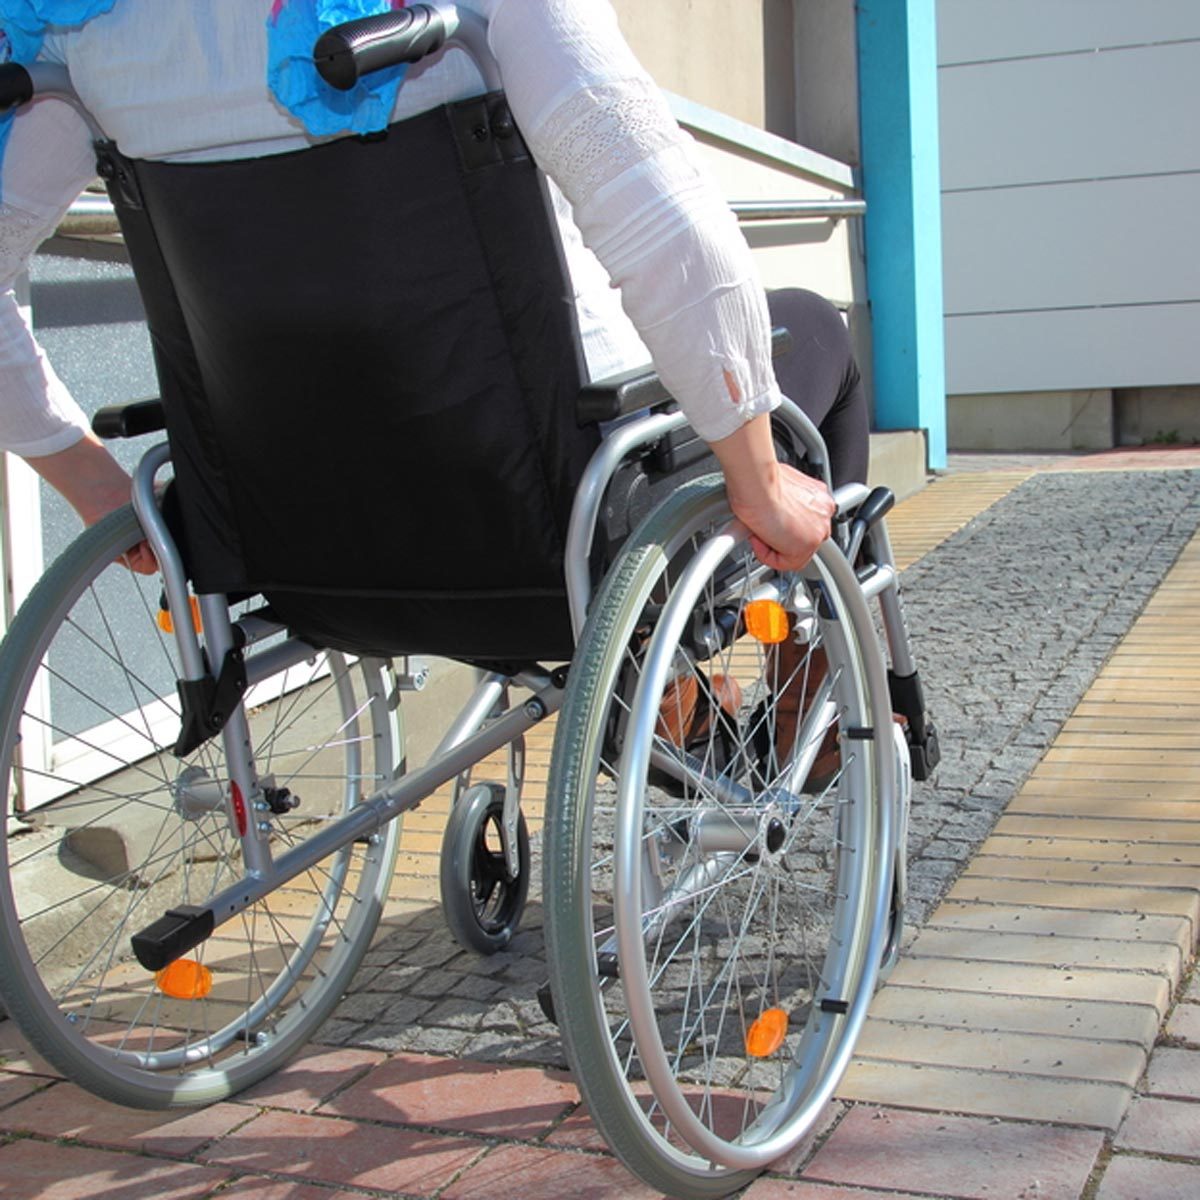 10 Ways to Make Your Home More Handicap Accessible